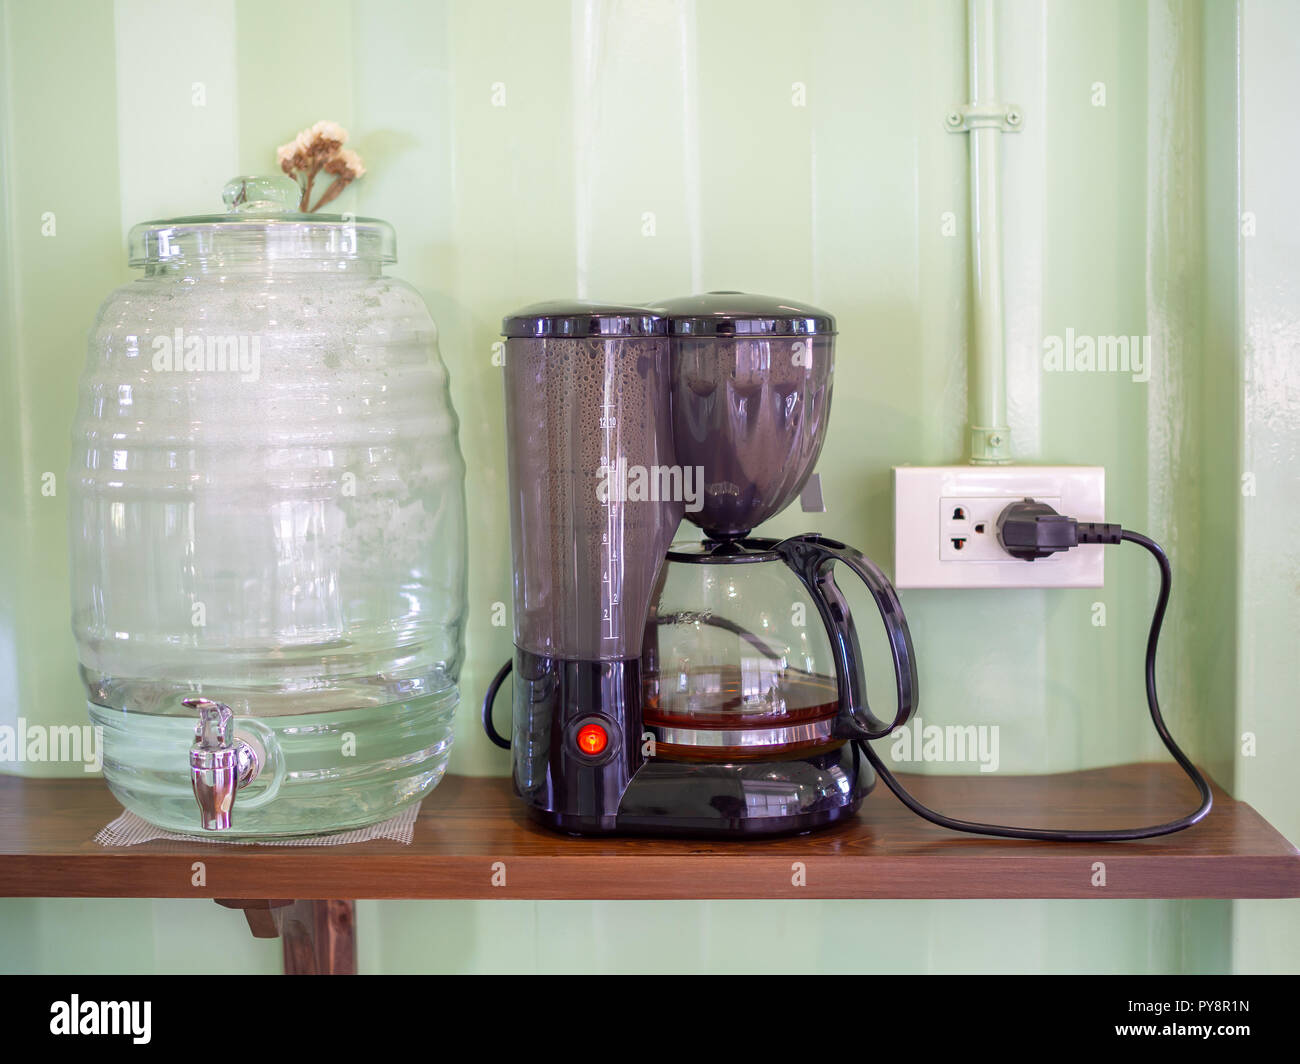 https://c8.alamy.com/comp/PY8R1N/cooler-bottle-and-electric-kettle-with-plug-on-wooden-shelf-on-light-green-container-wall-background-in-cafe-PY8R1N.jpg